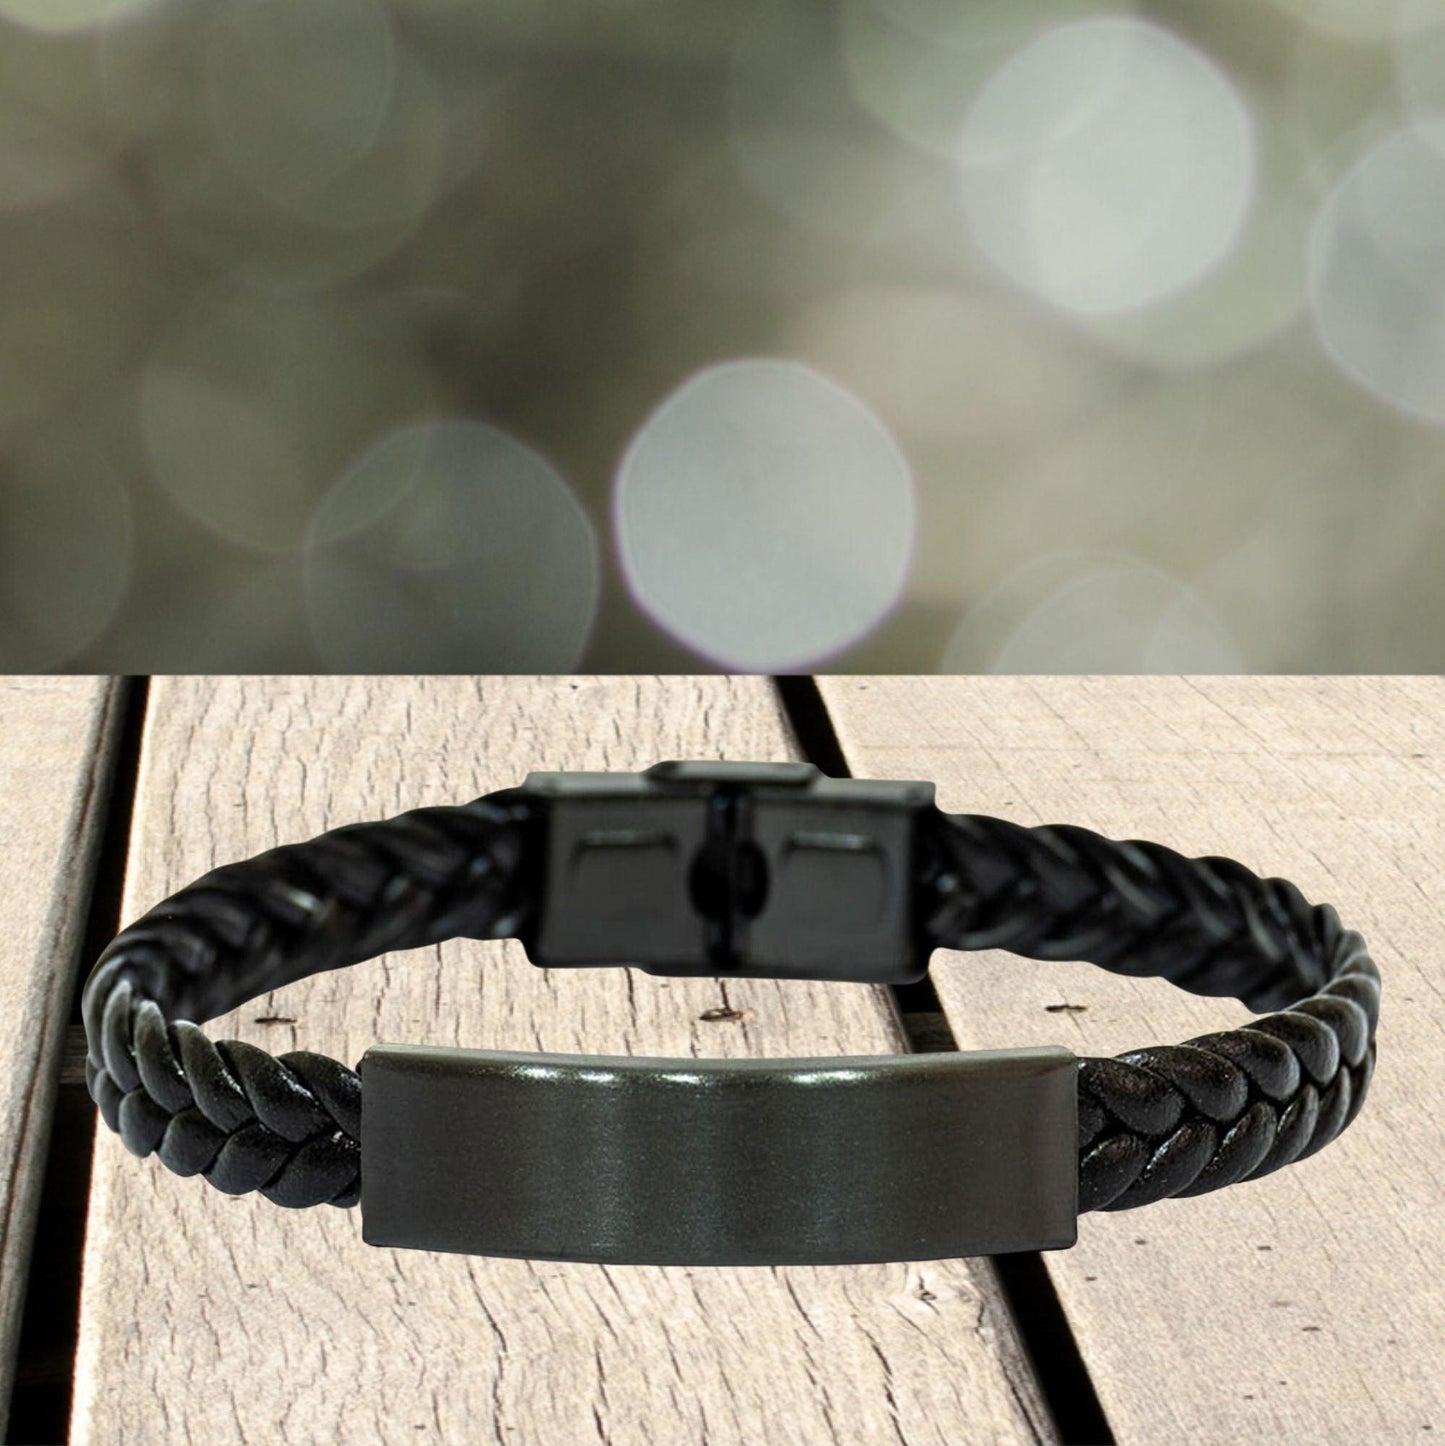 Cousin Gifts, To My Cousin Remember, you will never lose. You will either WIN or LEARN, Keepsake Braided Leather Bracelet For Cousin Engraved, Birthday Christmas Gifts Ideas For Cousin X-mas Gifts